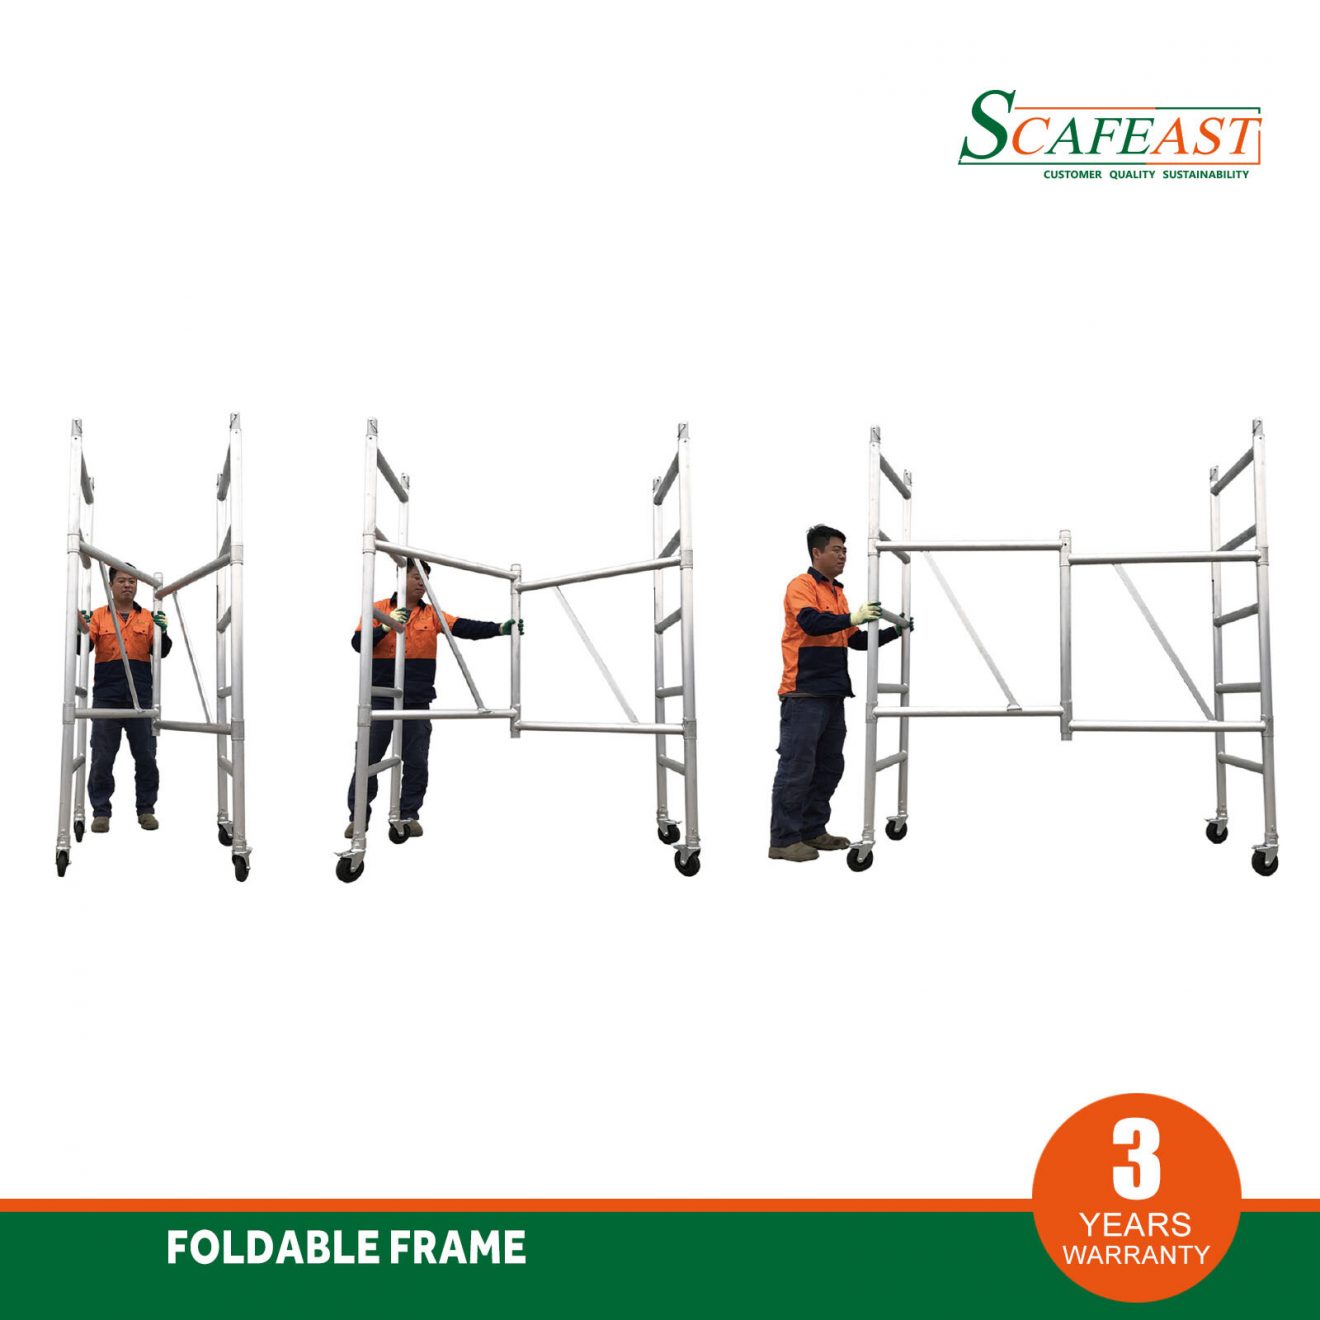 2M Foldable Mobile Scaffold Tower Foldable Frame